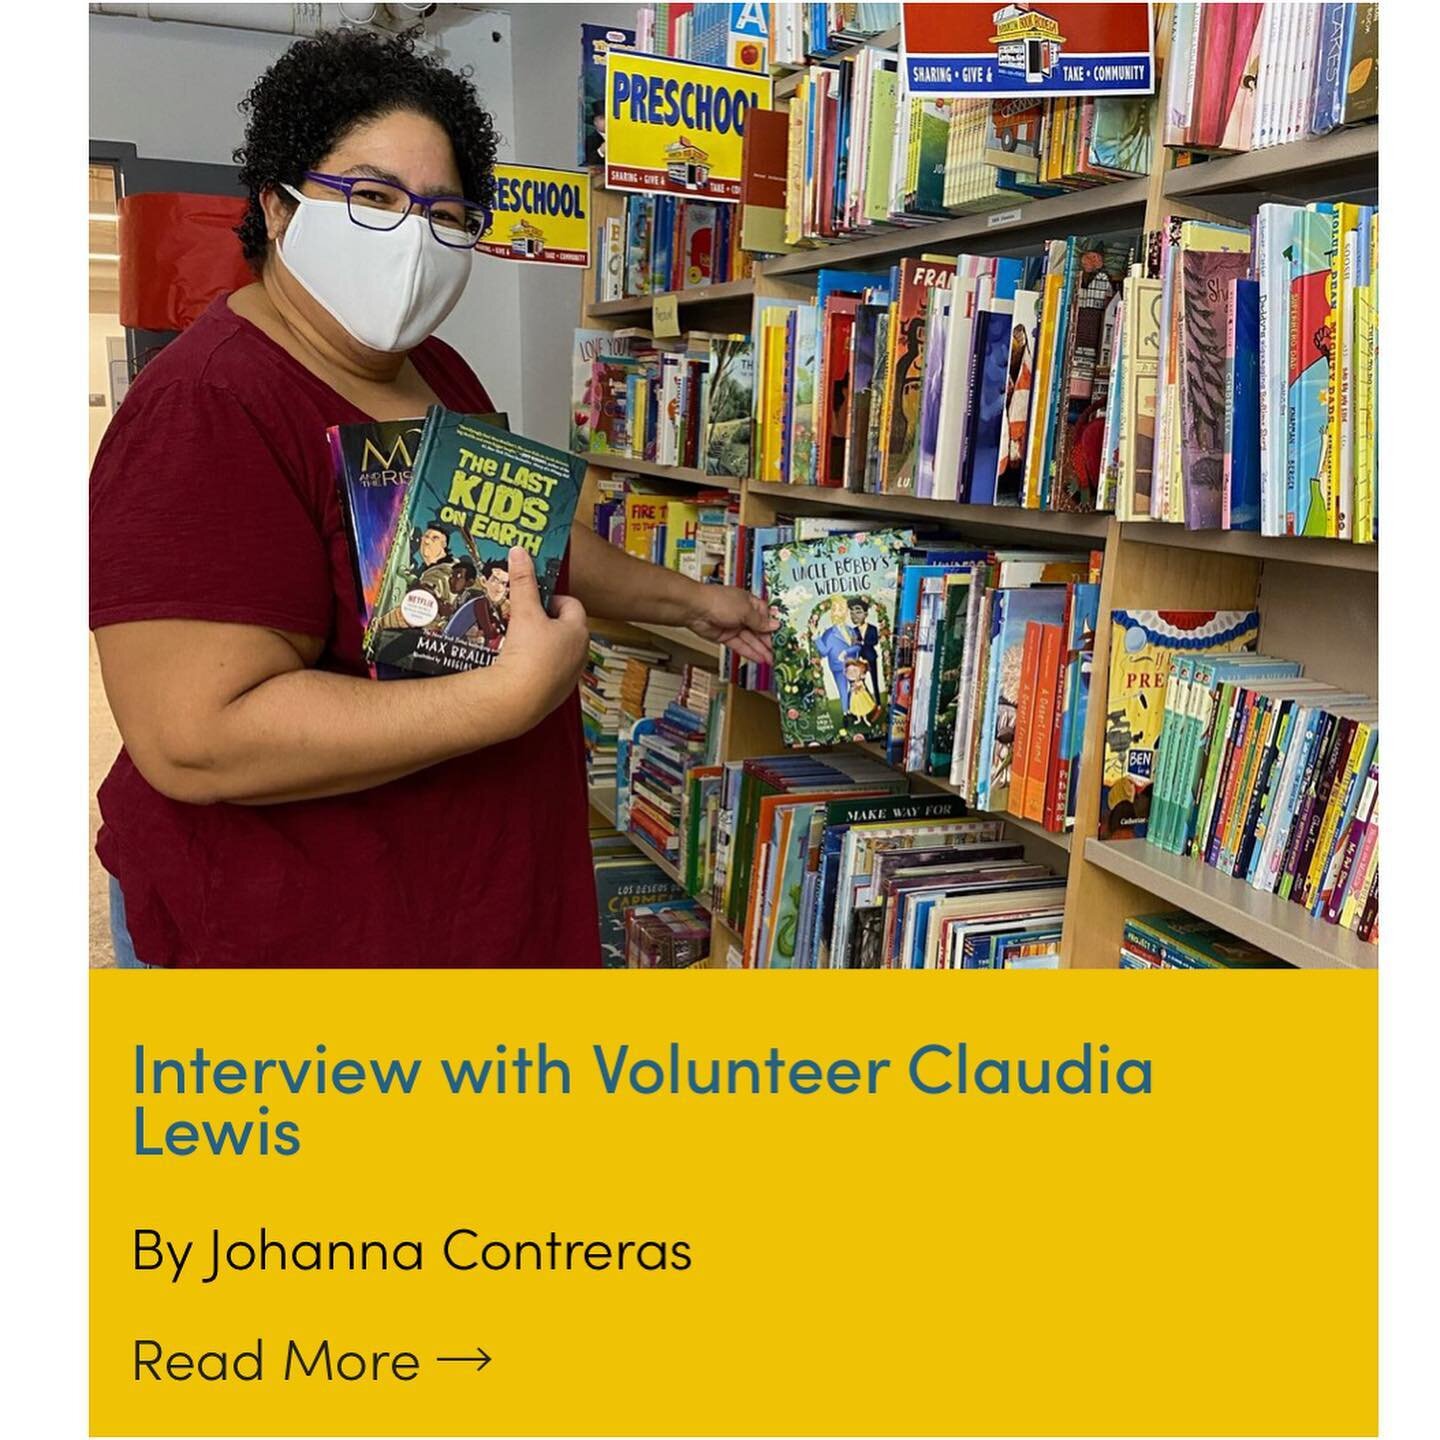 Check out the blog on our website to read the full interview with volunteer Claudia Lewis.

#thankful #volunteer #brooklynbookbodega